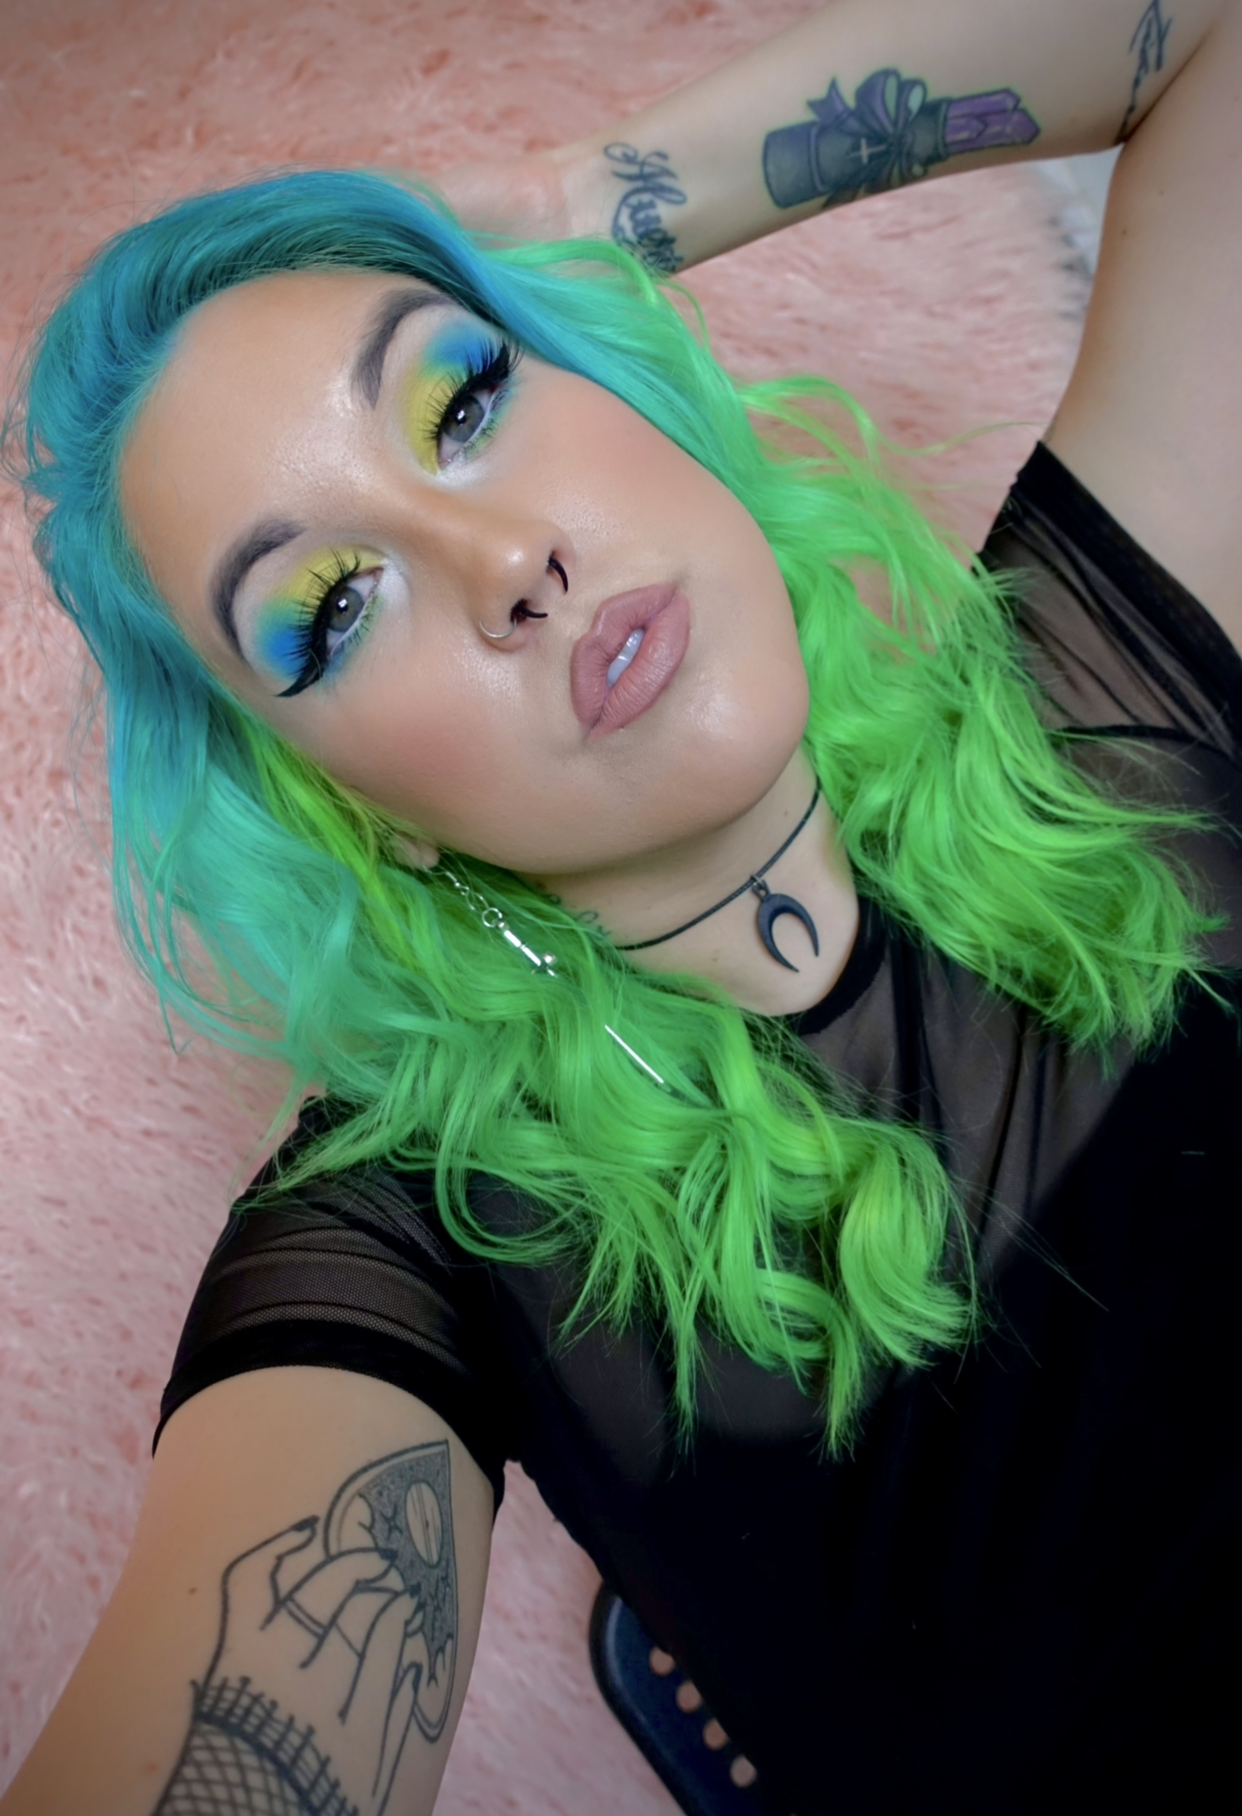 Dying My Hair Turquoise & Green using Manic Panic + Lime Crime